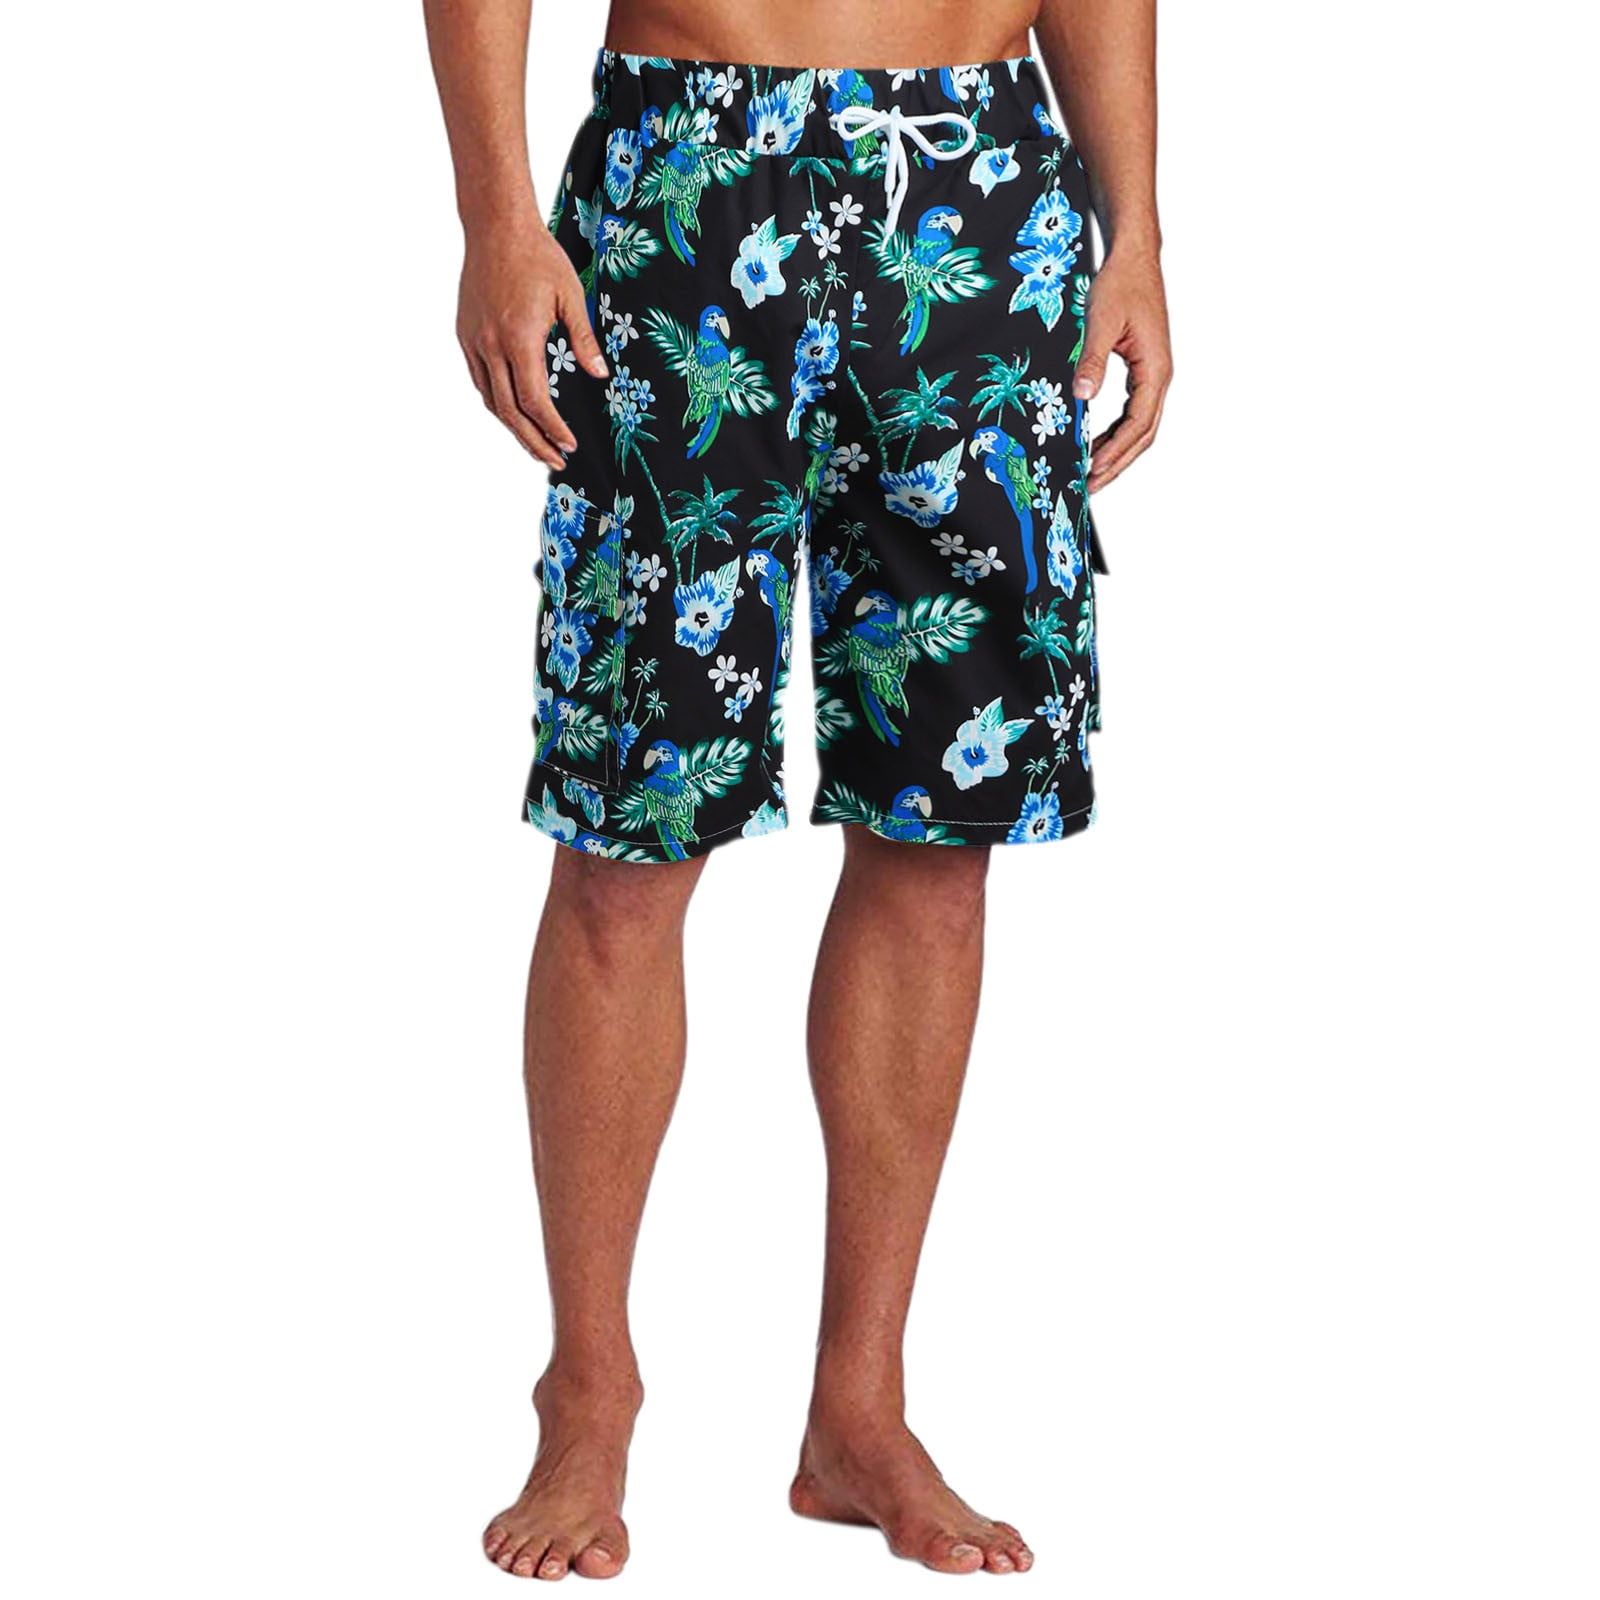 JERECY Mens Swim Trunks Green Yellow Red Hipster Tiger Quick Dry Board Shorts with Drawstring and Pockets